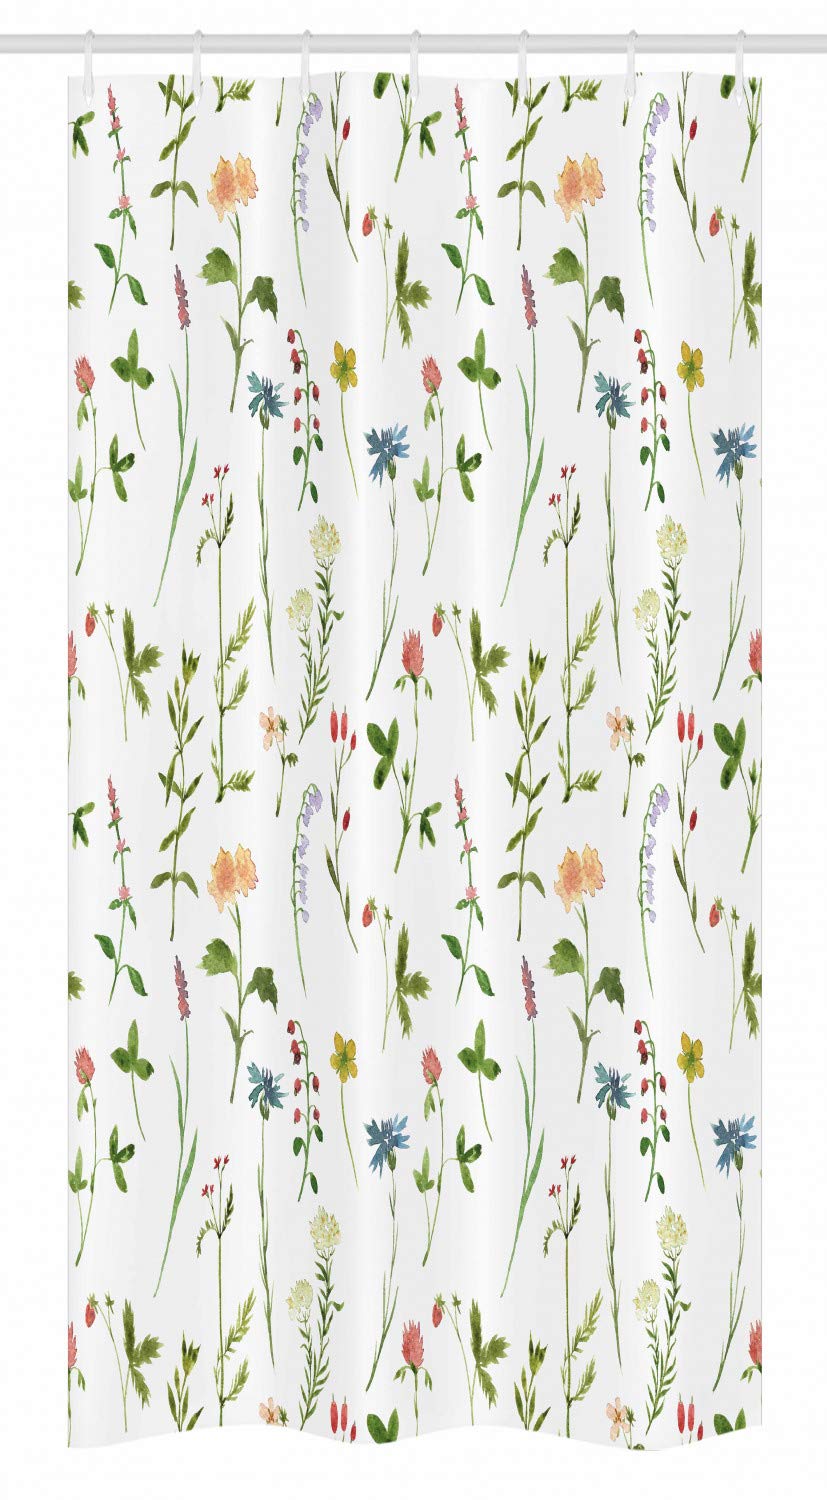 Ambesonne Floral Stall Shower Curtain, Spring Season Themed Watercolors Painting of Herbs Flowers Botanical Garden Artwork, Fabric Bathroom Decor Set with Hooks, 36